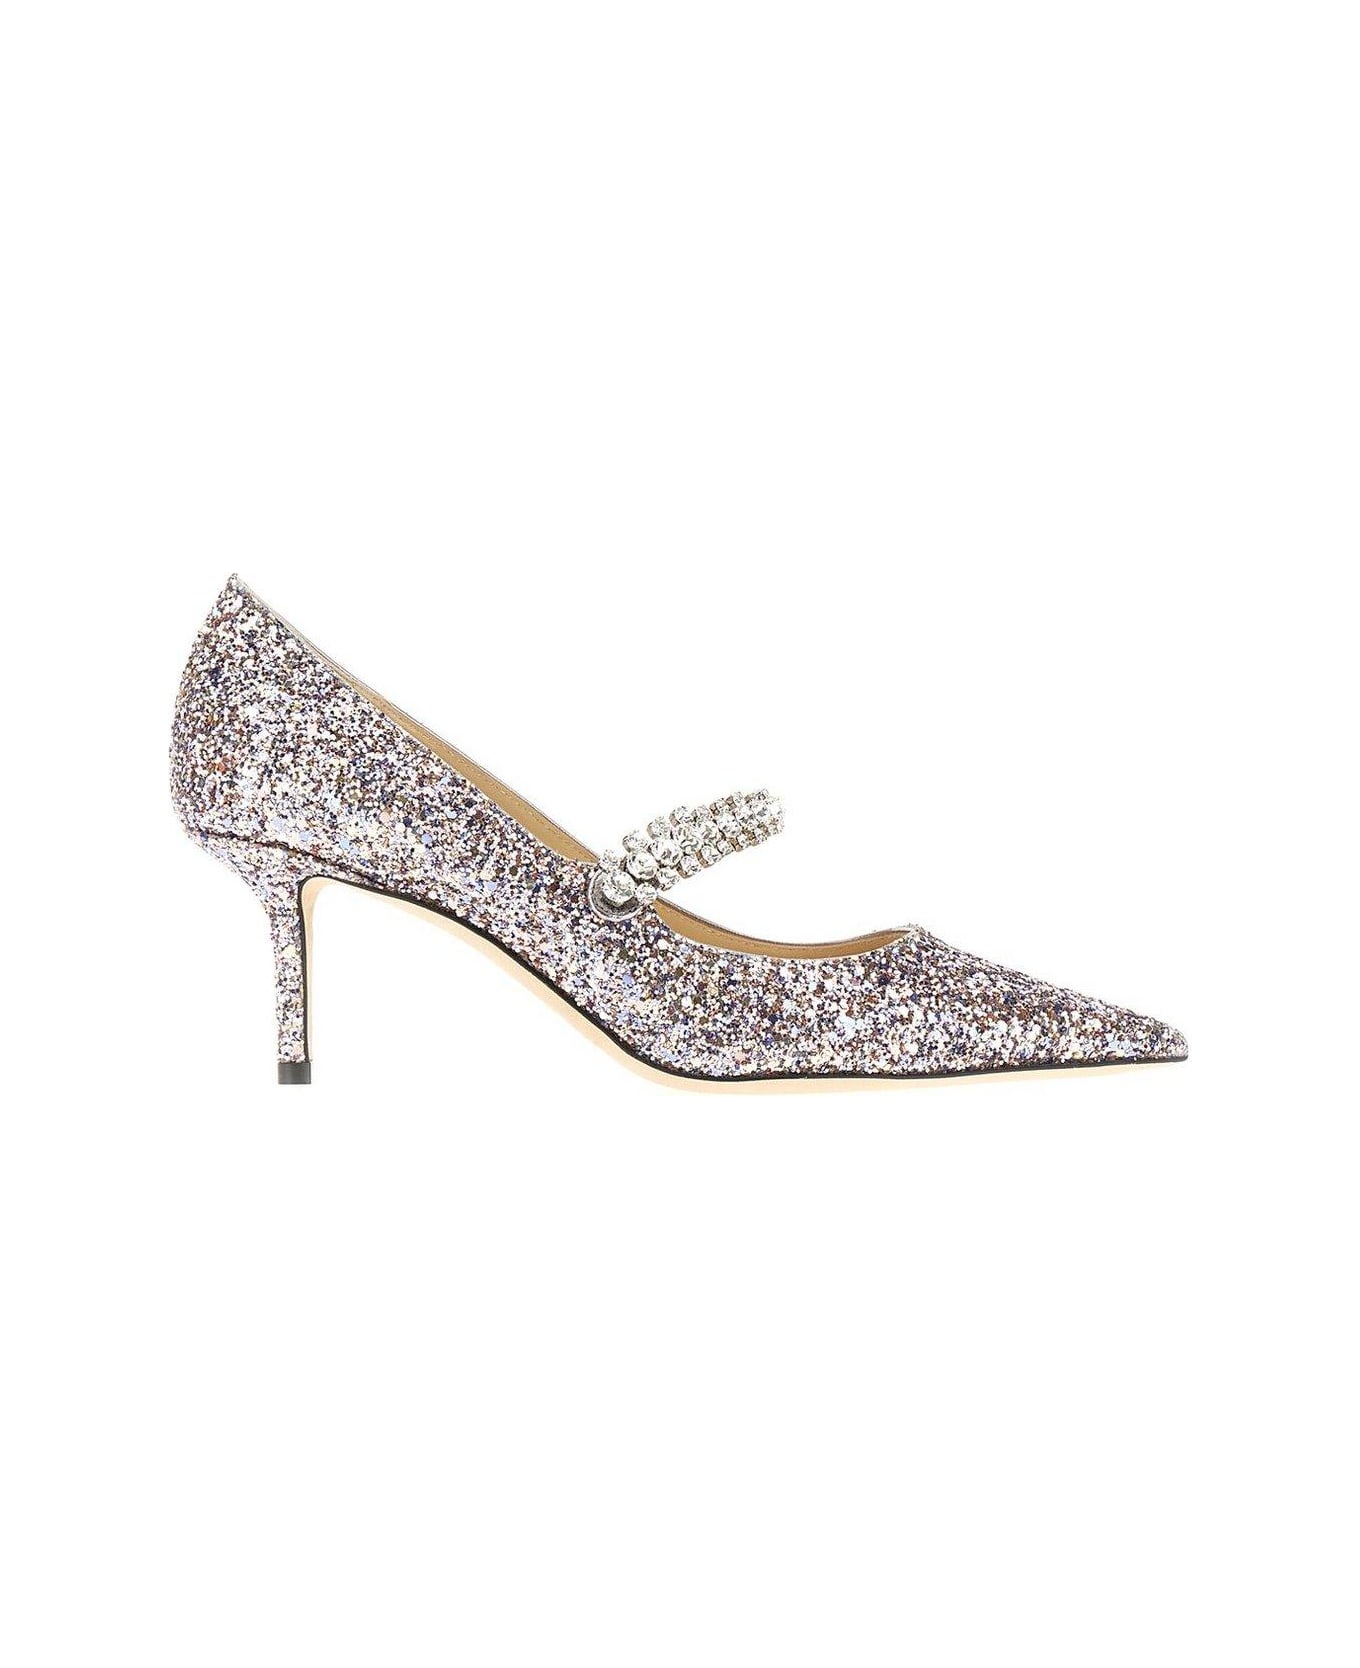 Jimmy Choo Glittered Pointed Toe Pumps - Pink